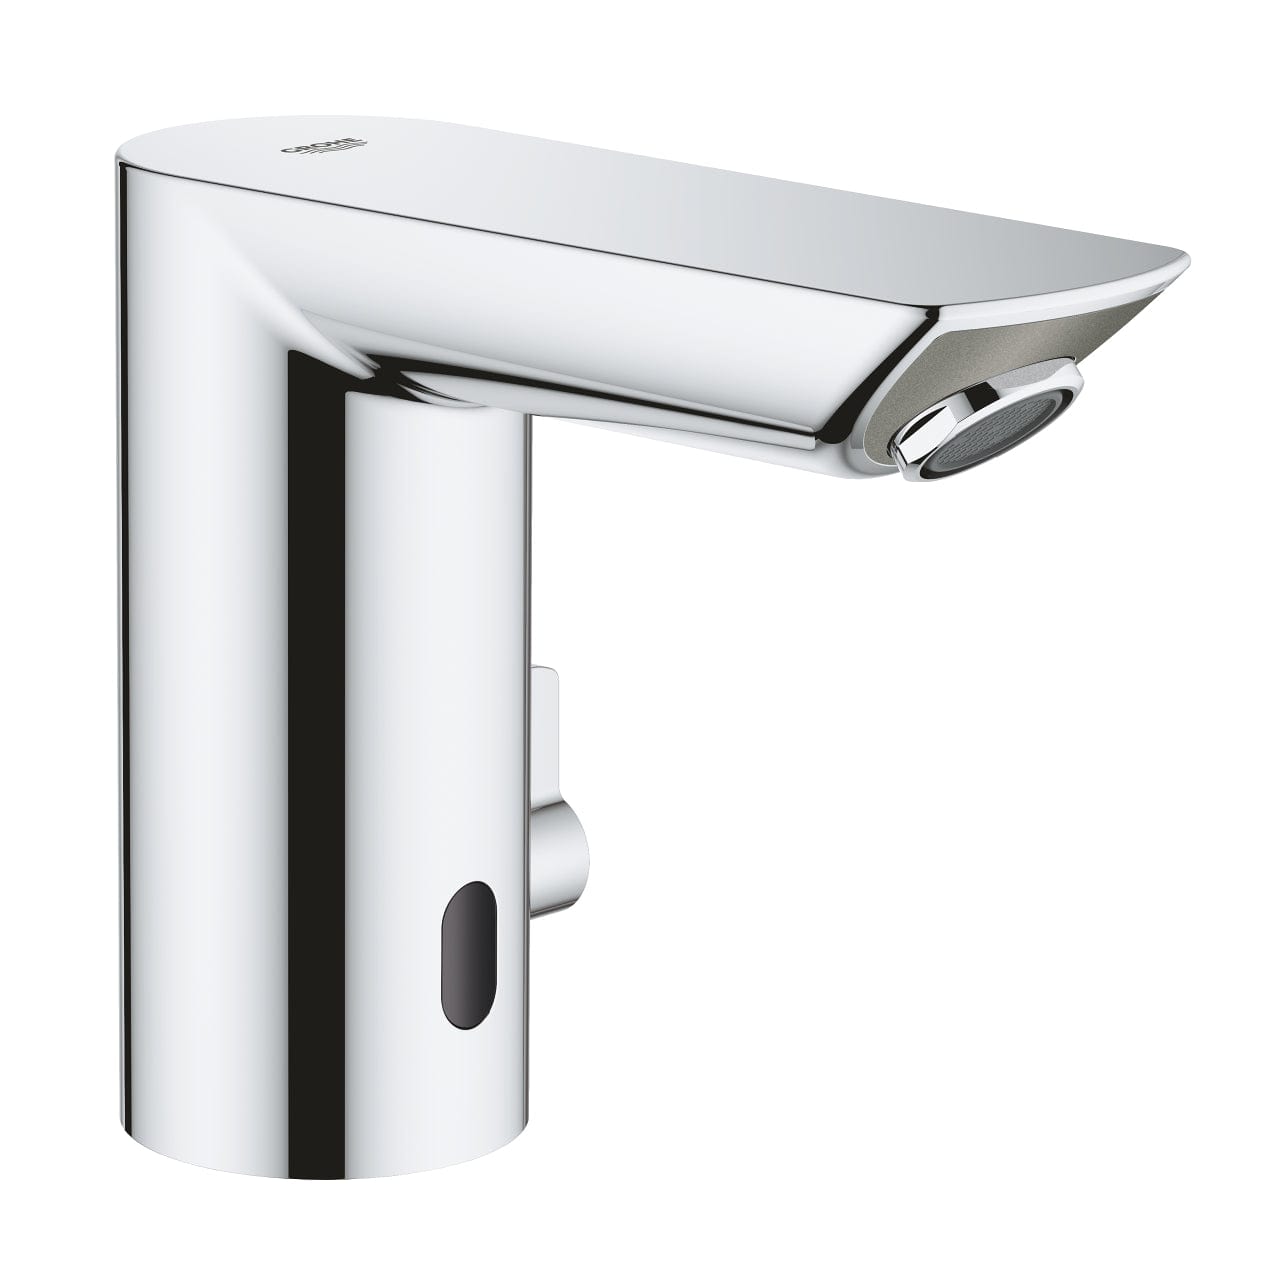 Grohe Allure Brilliant Single-Lever L-Size Basin Mixer 1/2″ | Supply Master | Accra, Ghana Bathroom Faucet Buy Tools hardware Building materials